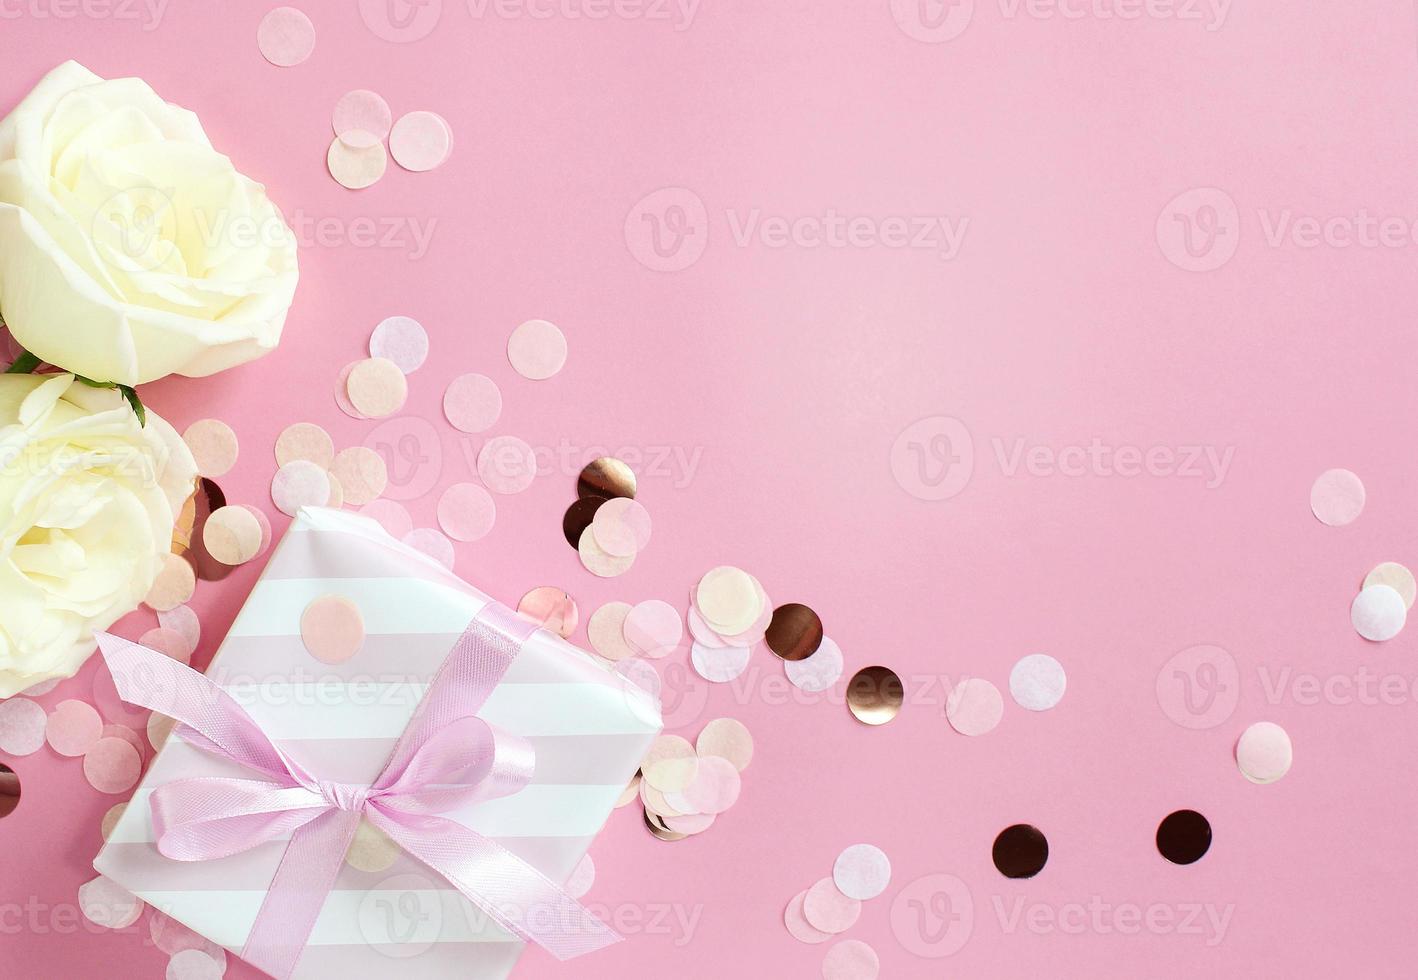 gift boxes and rose flowers on pink background. Happy Valentines day, Mothers day, birthday concept. Romantic flat lay composition. photo